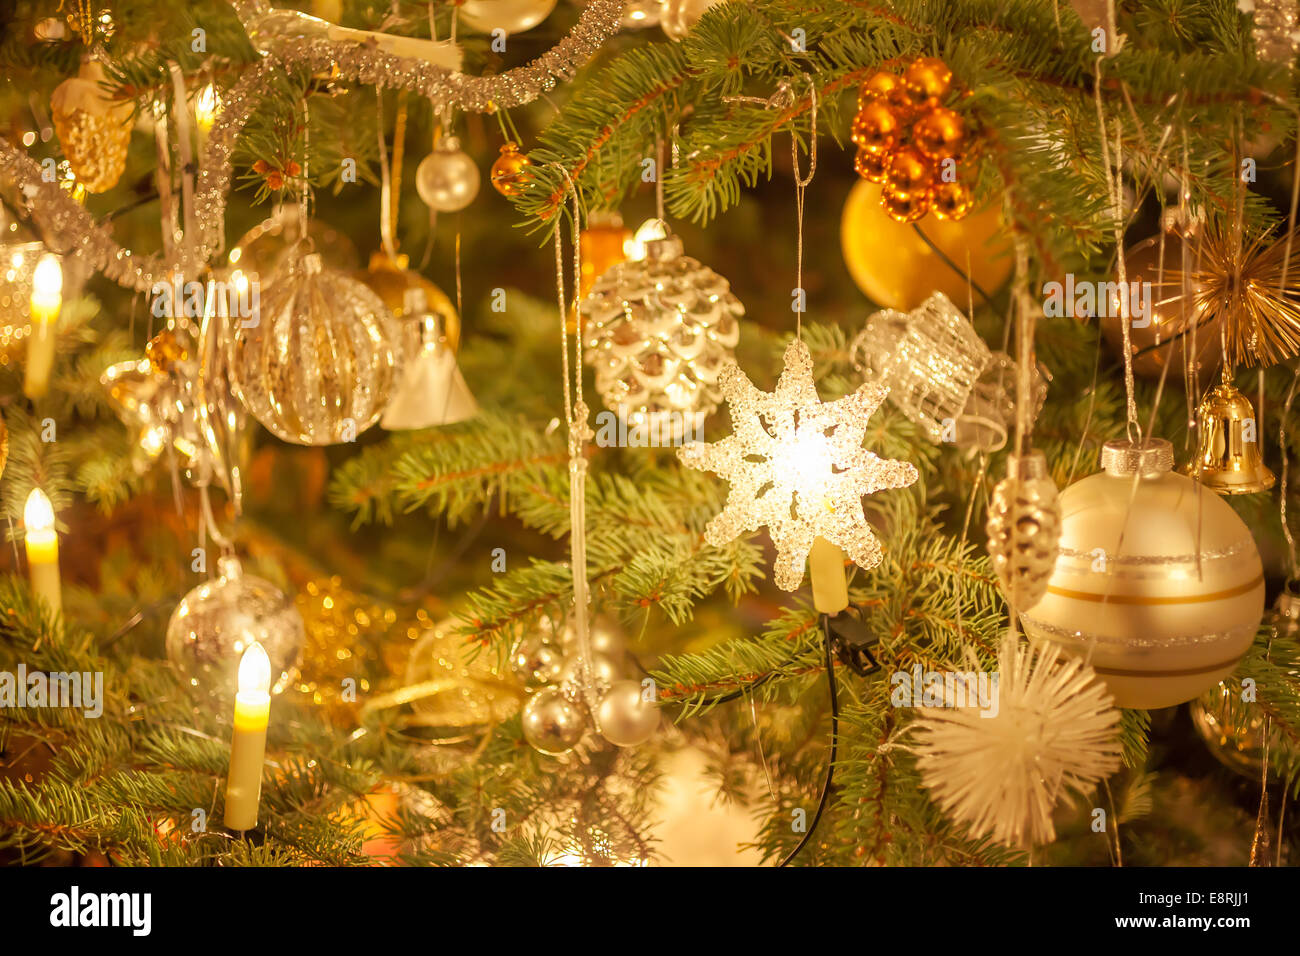 Close up of decorations on the Christmas tree Stock Image